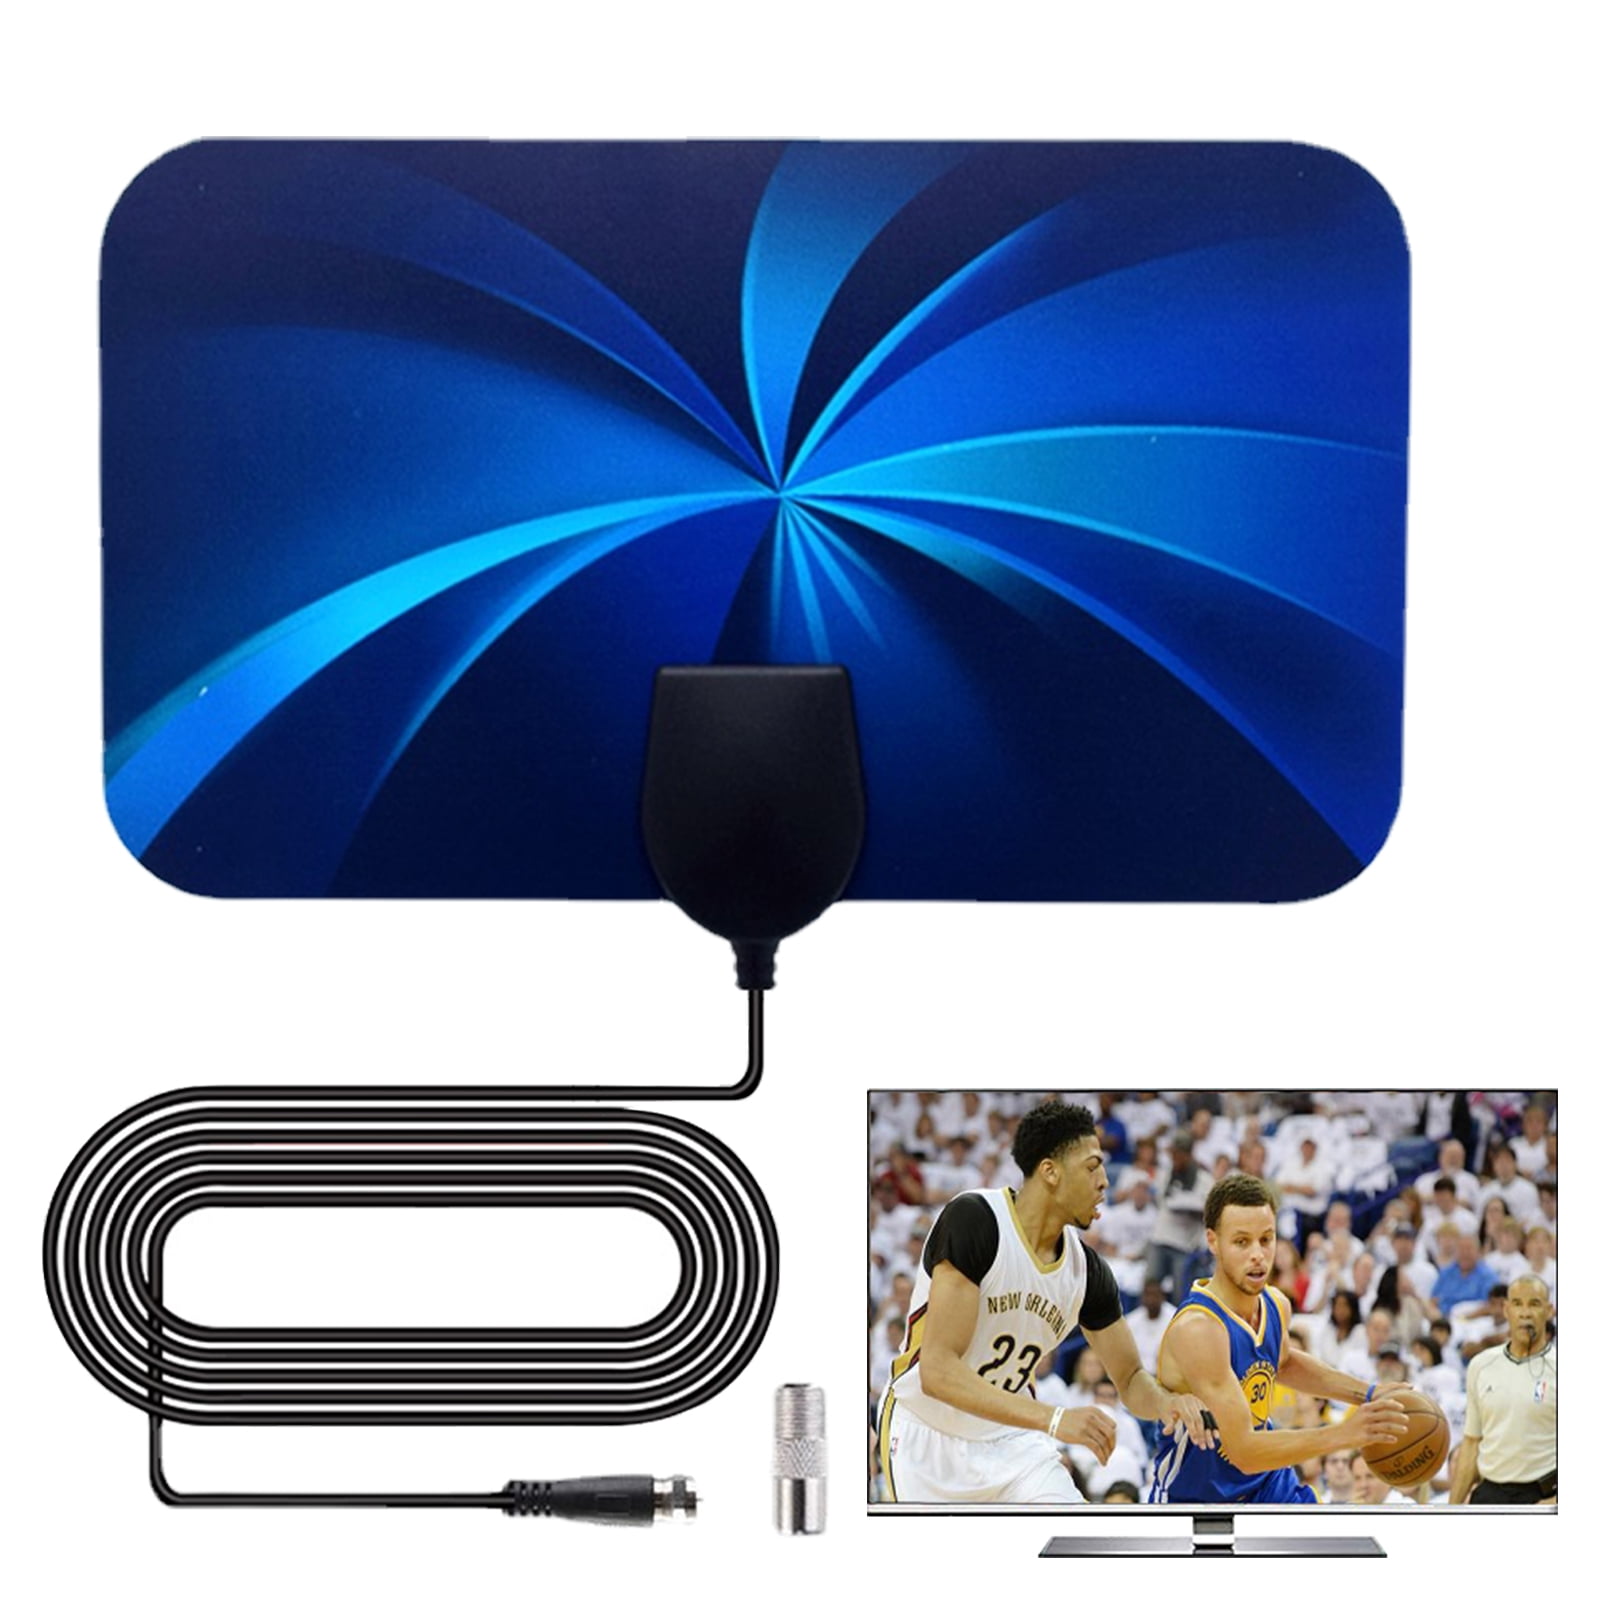 BESTHUA TV Antenne | DVB-T2 4K Antenna With Advanced Intelligent IC Chip | Signal Receiver Moisture & Thunder Antenna Replacement for TV Sign Reception - Walmart.com